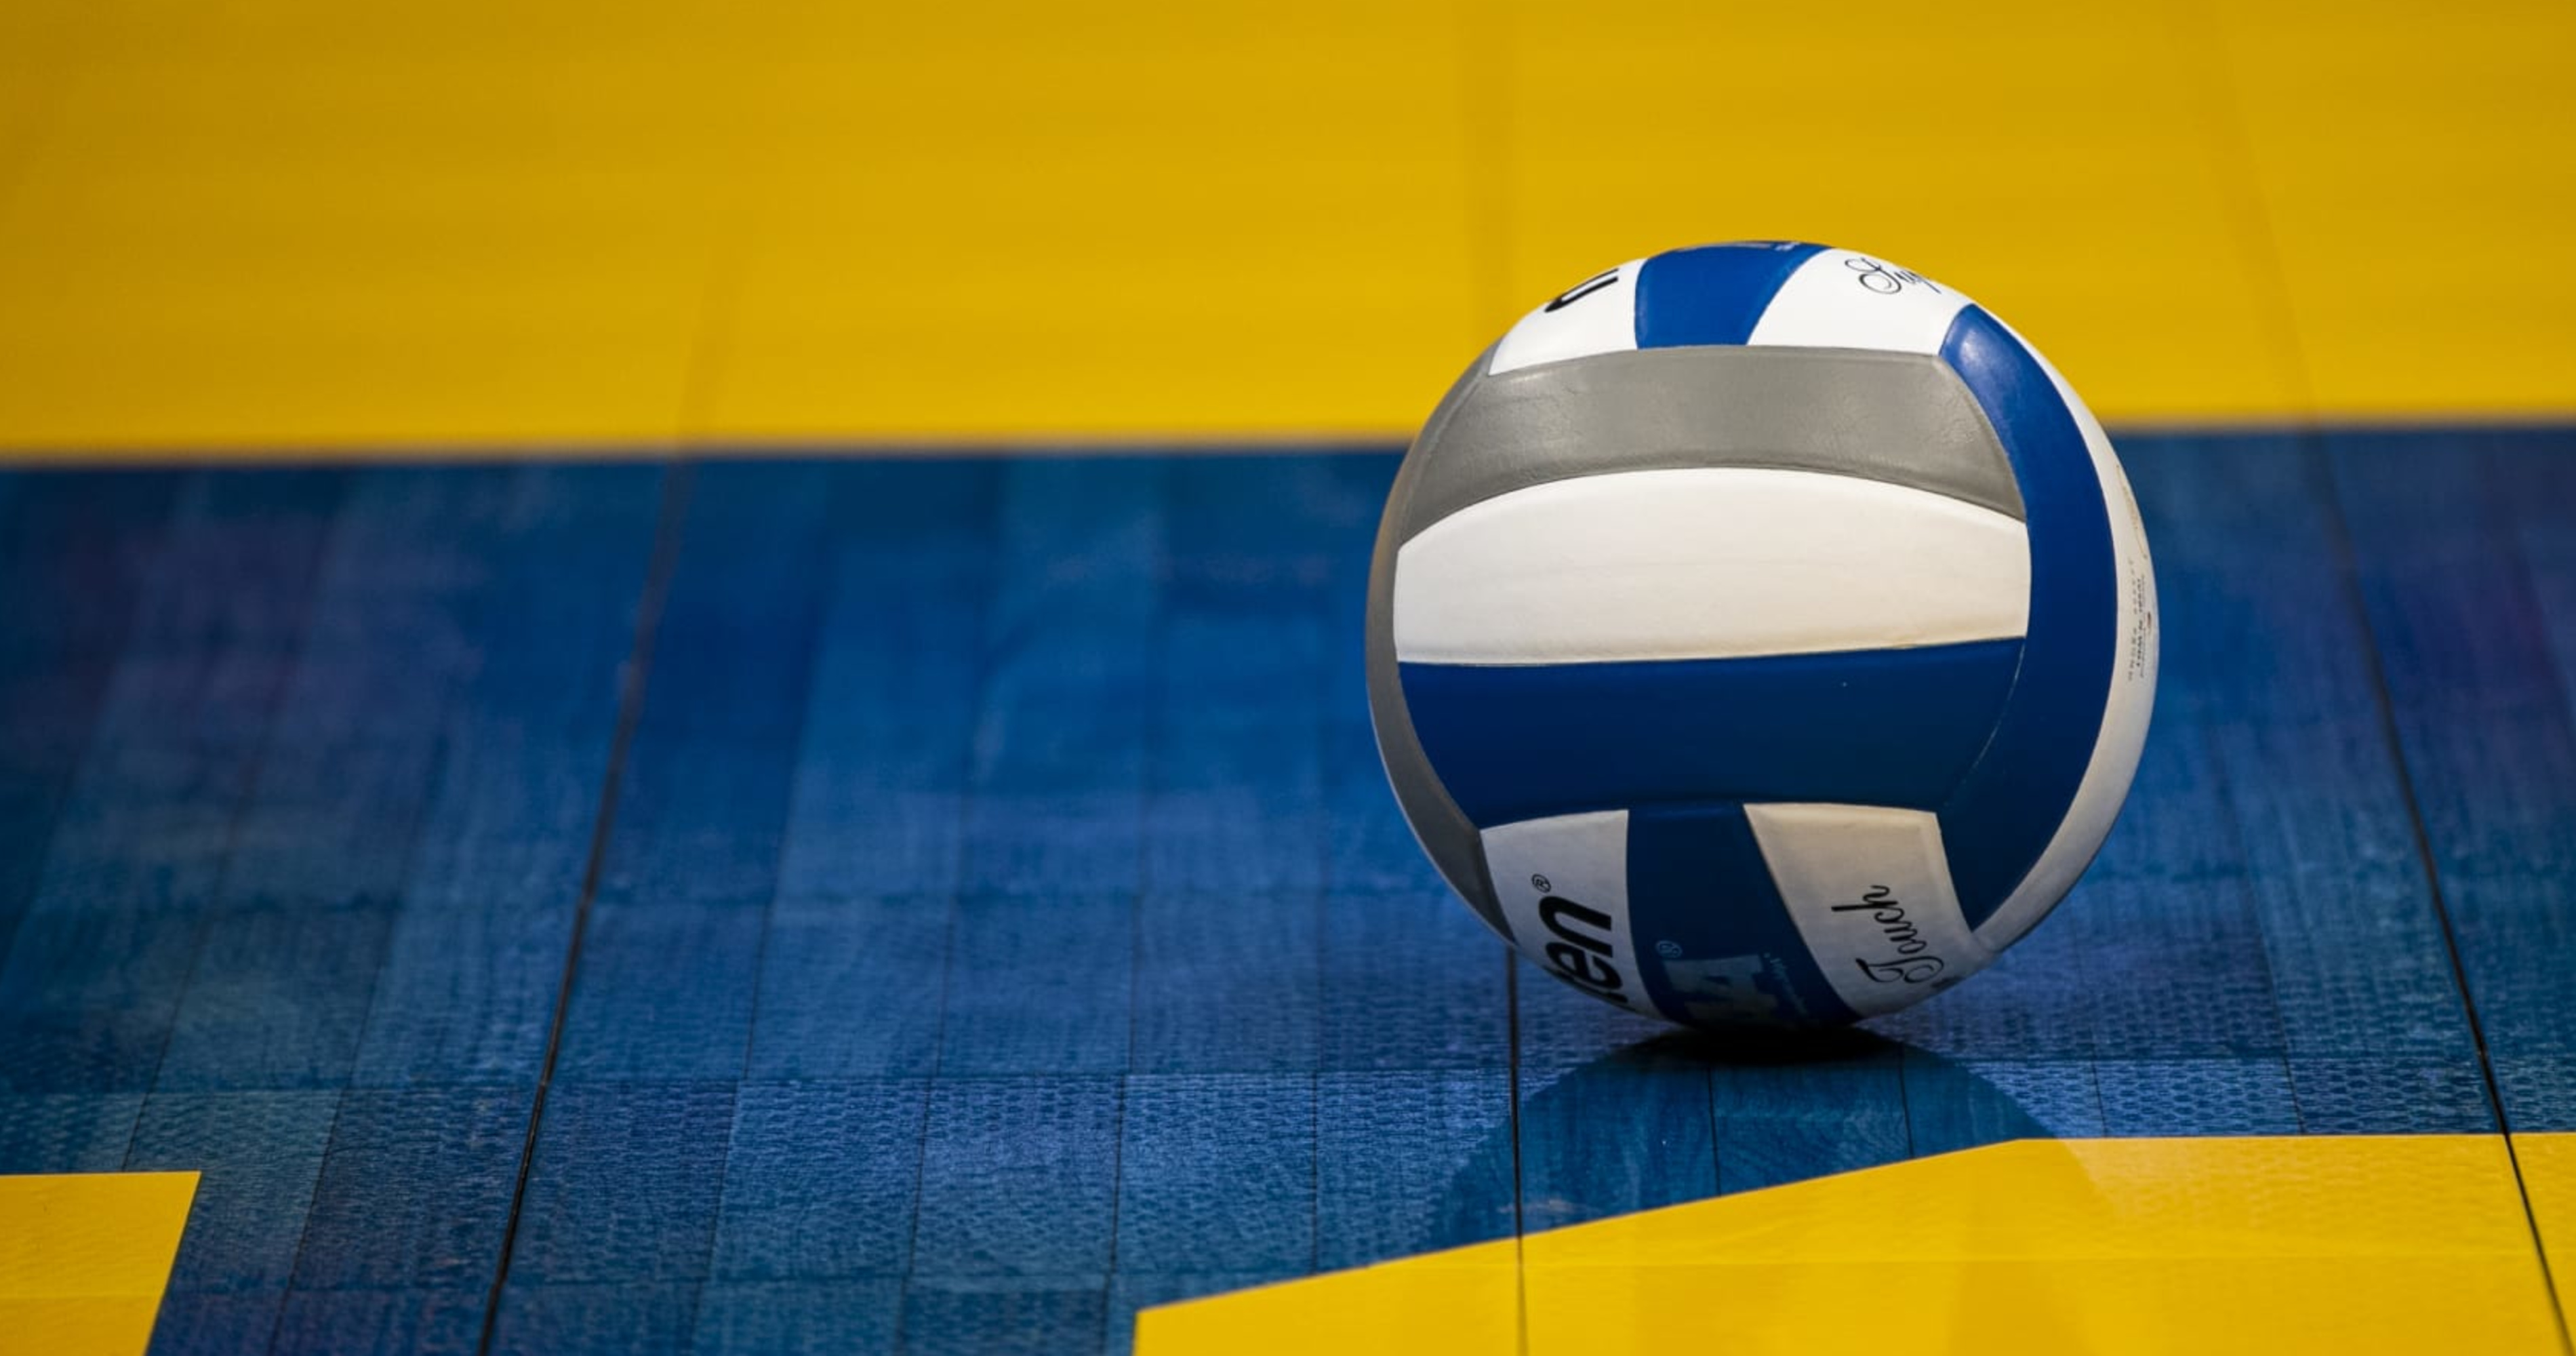 Indianapolis HS Volleyball Team Subjected to Racist Gestures from Opposing Player